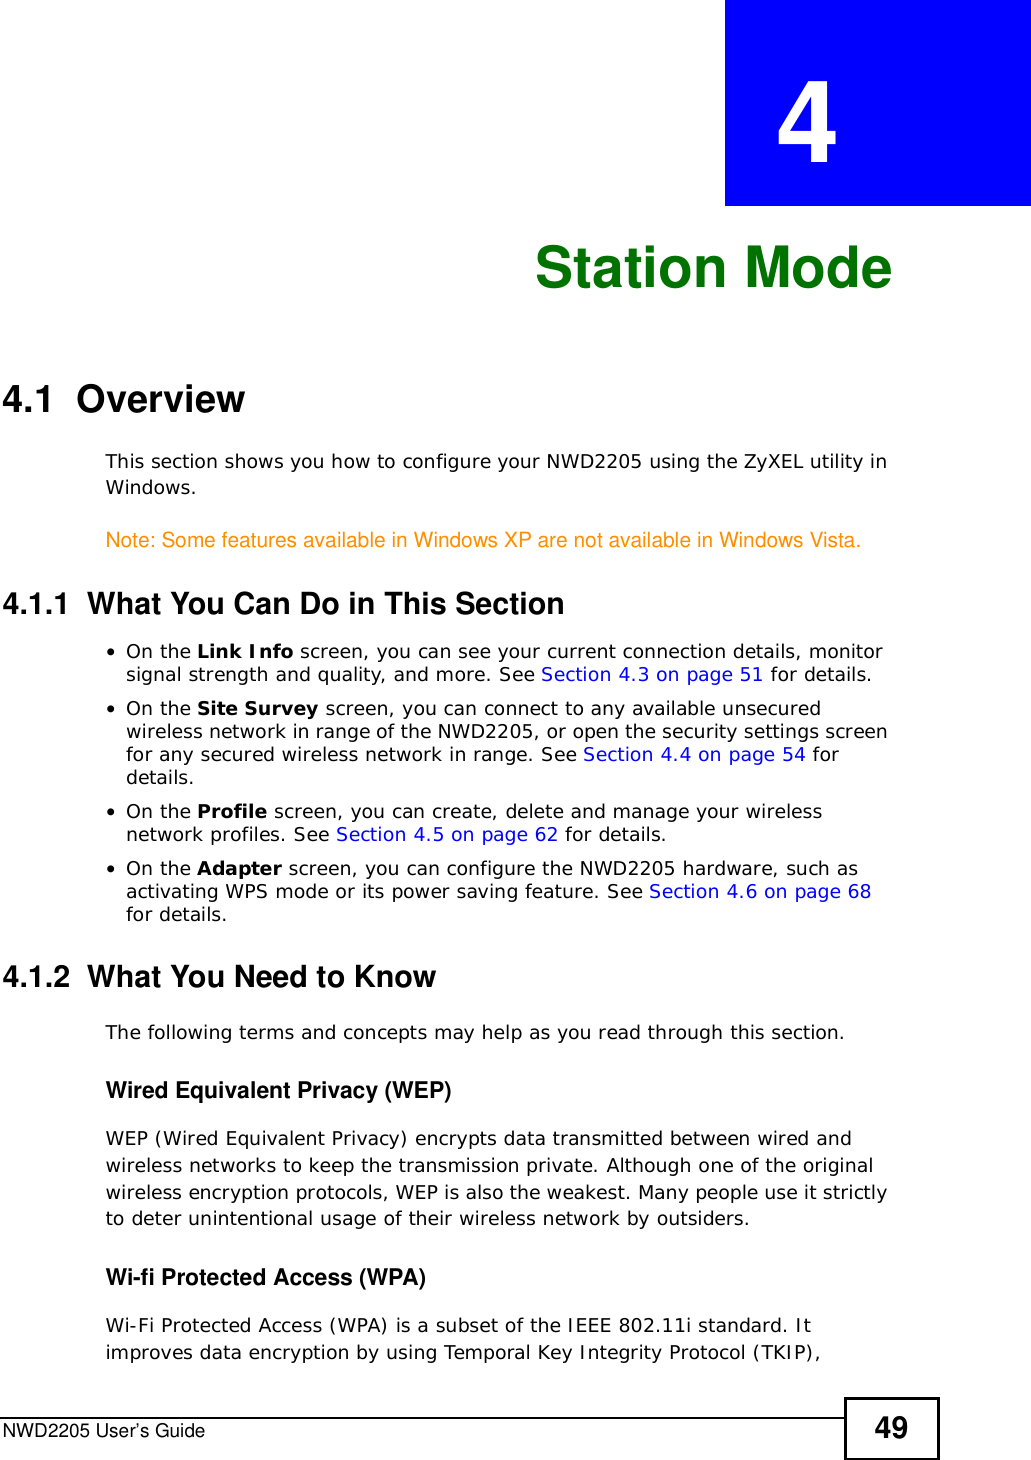 NWD2205 User’s Guide 49CHAPTER  4 Station Mode4.1  OverviewThis section shows you how to configure your NWD2205 using the ZyXEL utility in Windows.Note: Some features available in Windows XP are not available in Windows Vista.4.1.1  What You Can Do in This Section•On the Link Info screen, you can see your current connection details, monitor signal strength and quality, and more. See Section 4.3 on page 51 for details.•On the Site Survey screen, you can connect to any available unsecured wireless network in range of the NWD2205, or open the security settings screen for any secured wireless network in range. See Section 4.4 on page 54 for details.•On the Profile screen, you can create, delete and manage your wireless network profiles. See Section 4.5 on page 62 for details.•On the Adapter screen, you can configure the NWD2205 hardware, such as activating WPS mode or its power saving feature. See Section 4.6 on page 68for details.4.1.2  What You Need to KnowThe following terms and concepts may help as you read through this section.Wired Equivalent Privacy (WEP)WEP (Wired Equivalent Privacy) encrypts data transmitted between wired and wireless networks to keep the transmission private. Although one of the original wireless encryption protocols, WEP is also the weakest. Many people use it strictly to deter unintentional usage of their wireless network by outsiders.Wi-fi Protected Access (WPA)Wi-Fi Protected Access (WPA) is a subset of the IEEE 802.11i standard. It improves data encryption by using Temporal Key Integrity Protocol (TKIP), 